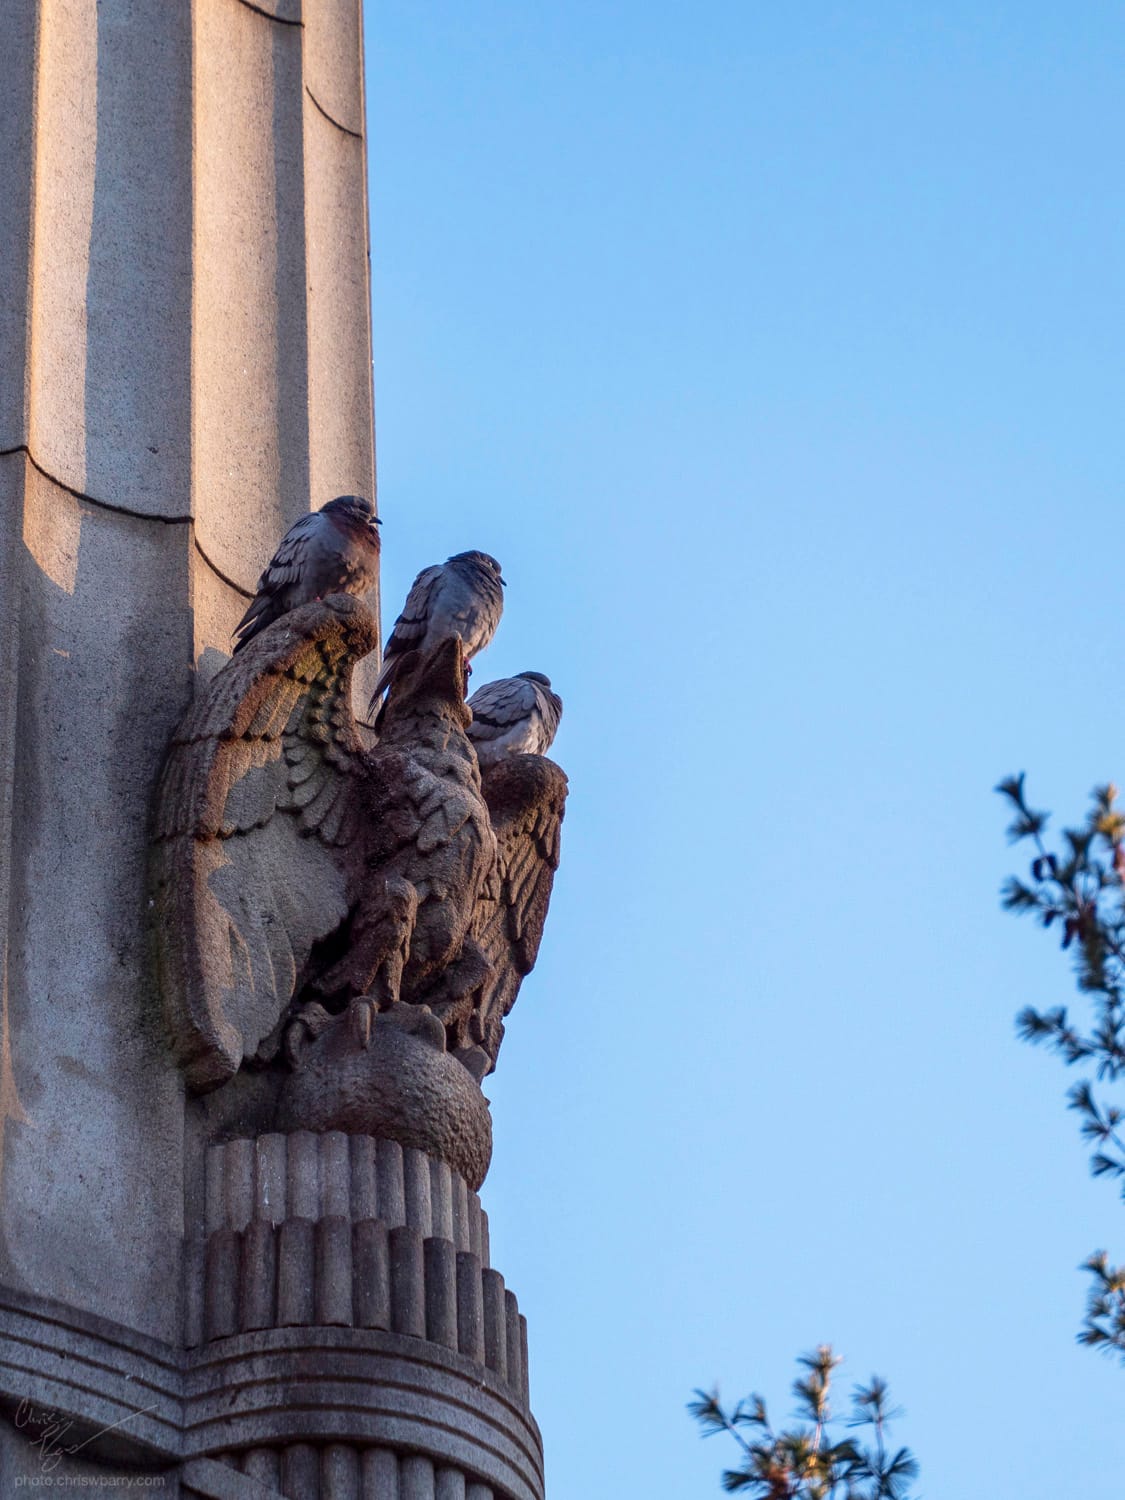 Three pigeons with fluffed feathers resting on top of a sculpture of an eagle